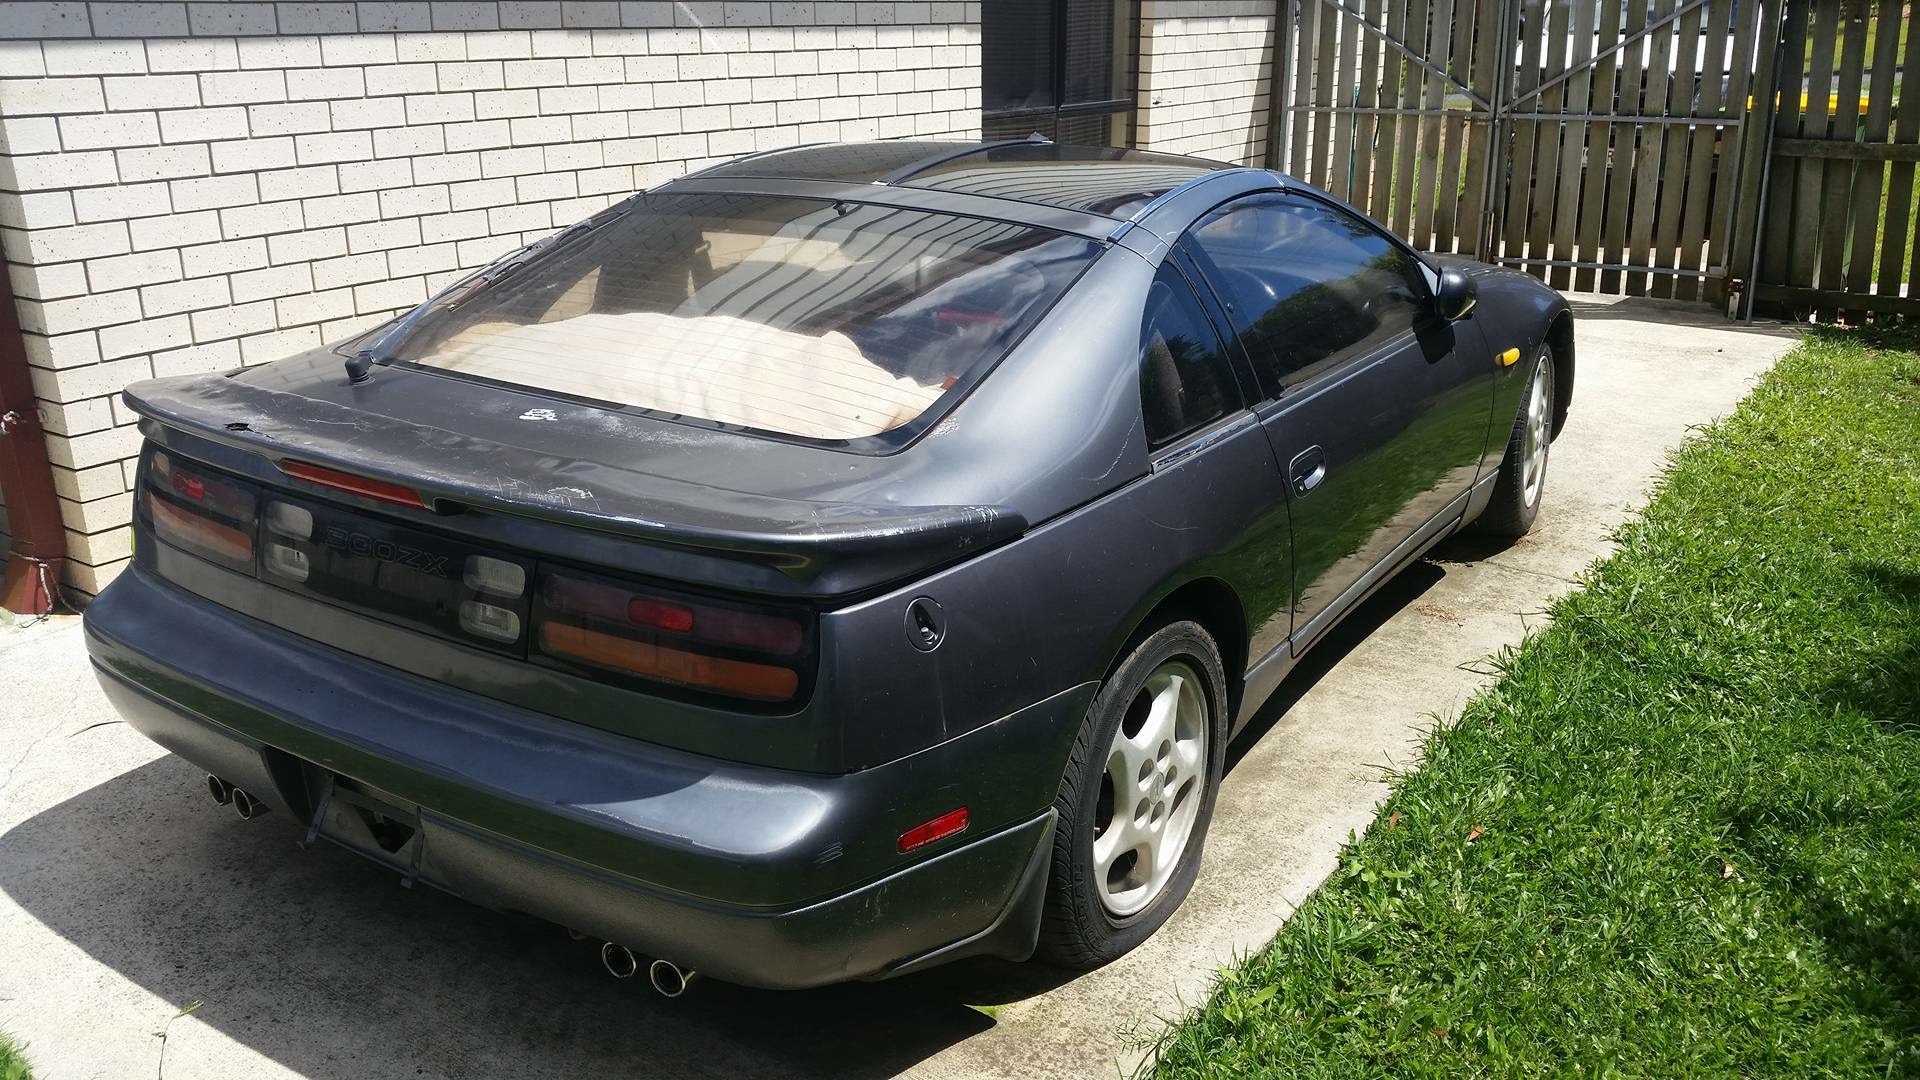 1989 300Zx nissan transmission used